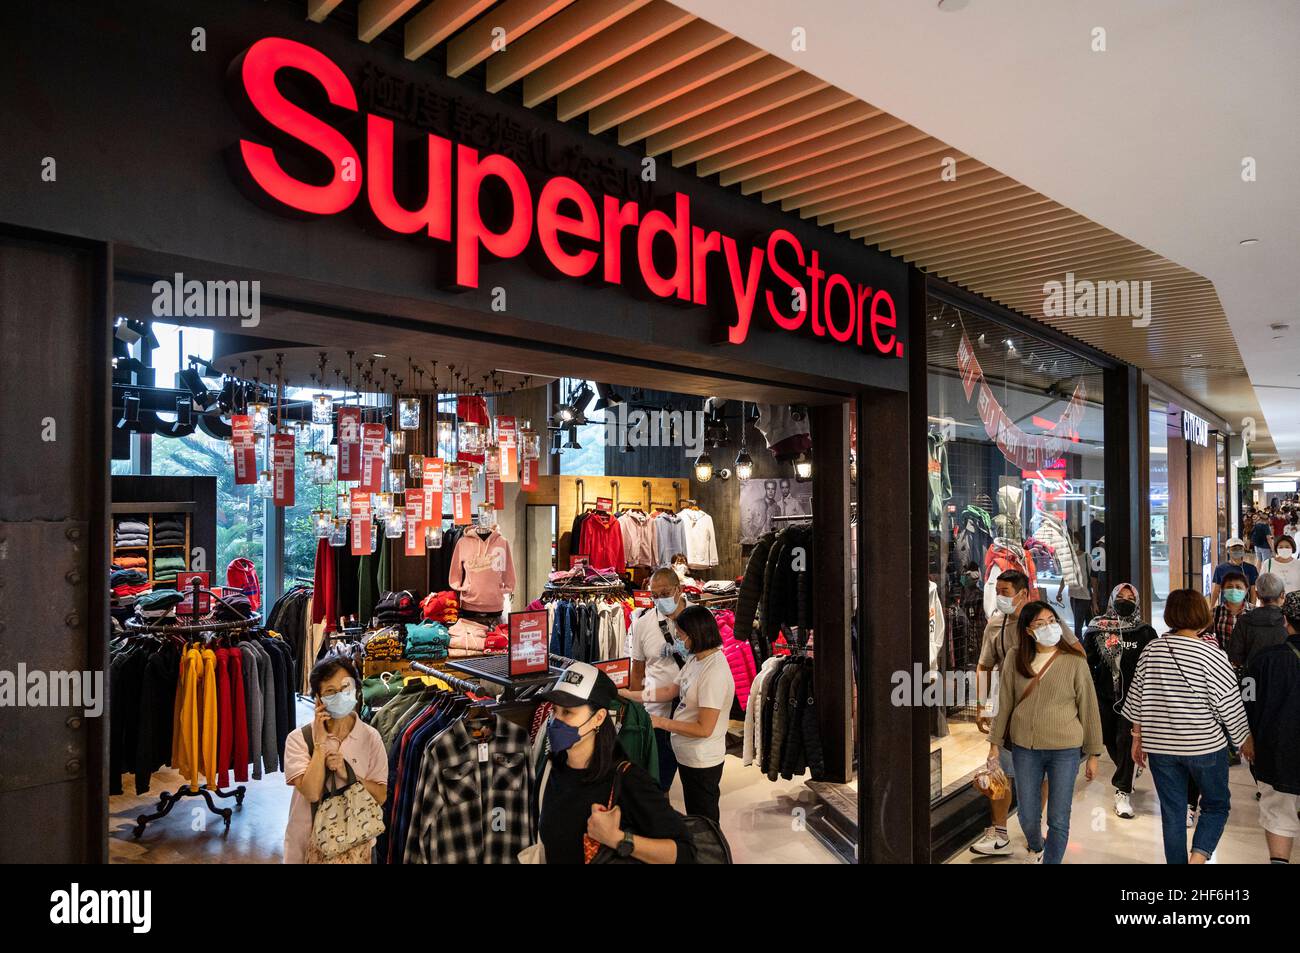 British clothing brand, Superdry store and logo seen in Hong Kong Stock  Photo - Alamy